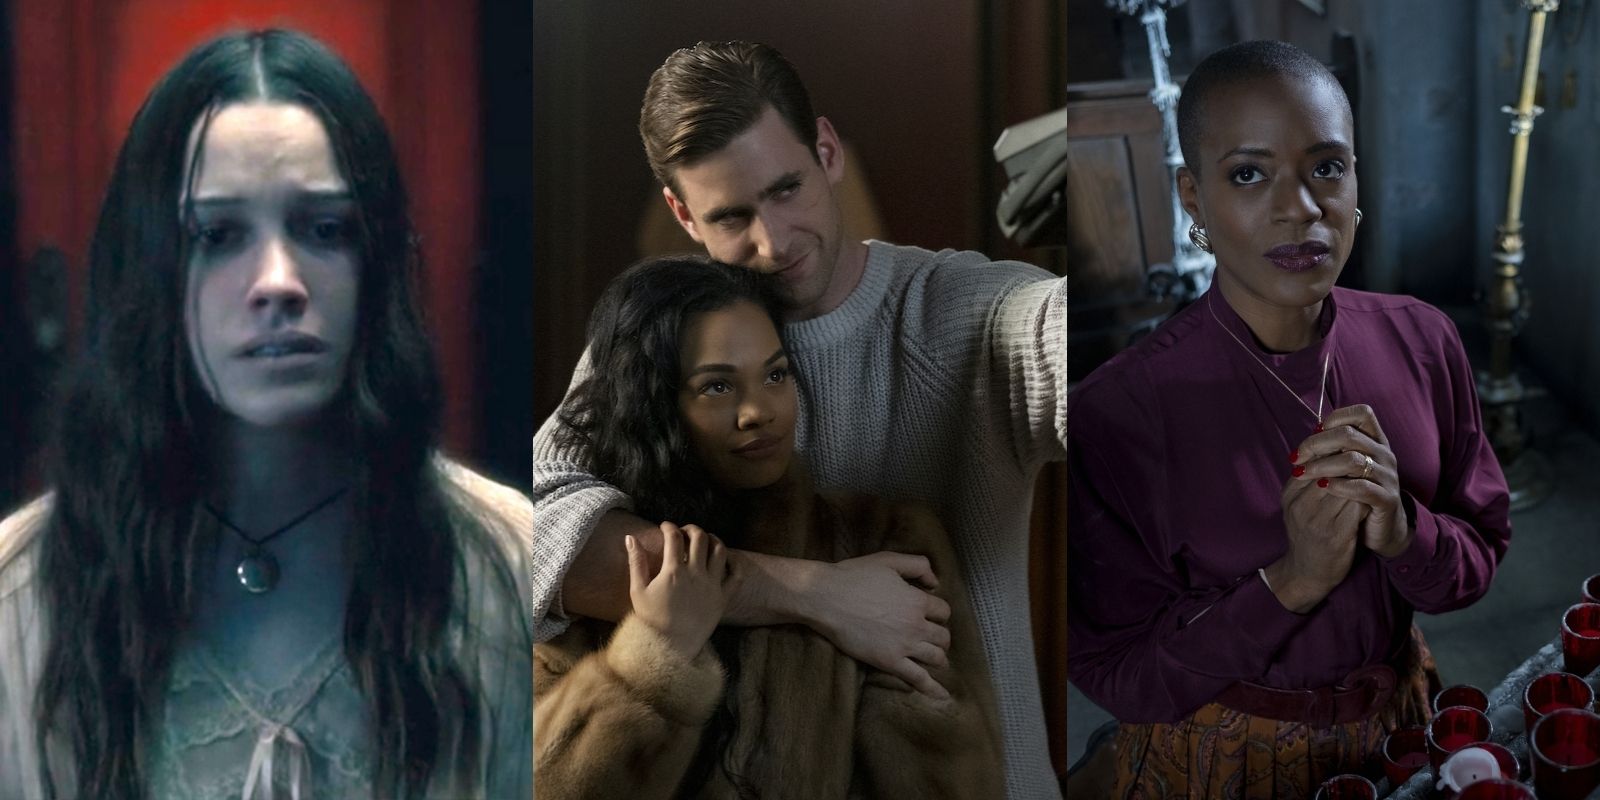 Best performances in The Haunting of Hill House and The Haunting of Bly Manor including Victoria Pedretti (L), Oliver Jackson Cohen and Tahirah Sharif (M), and TNia Miller (R)